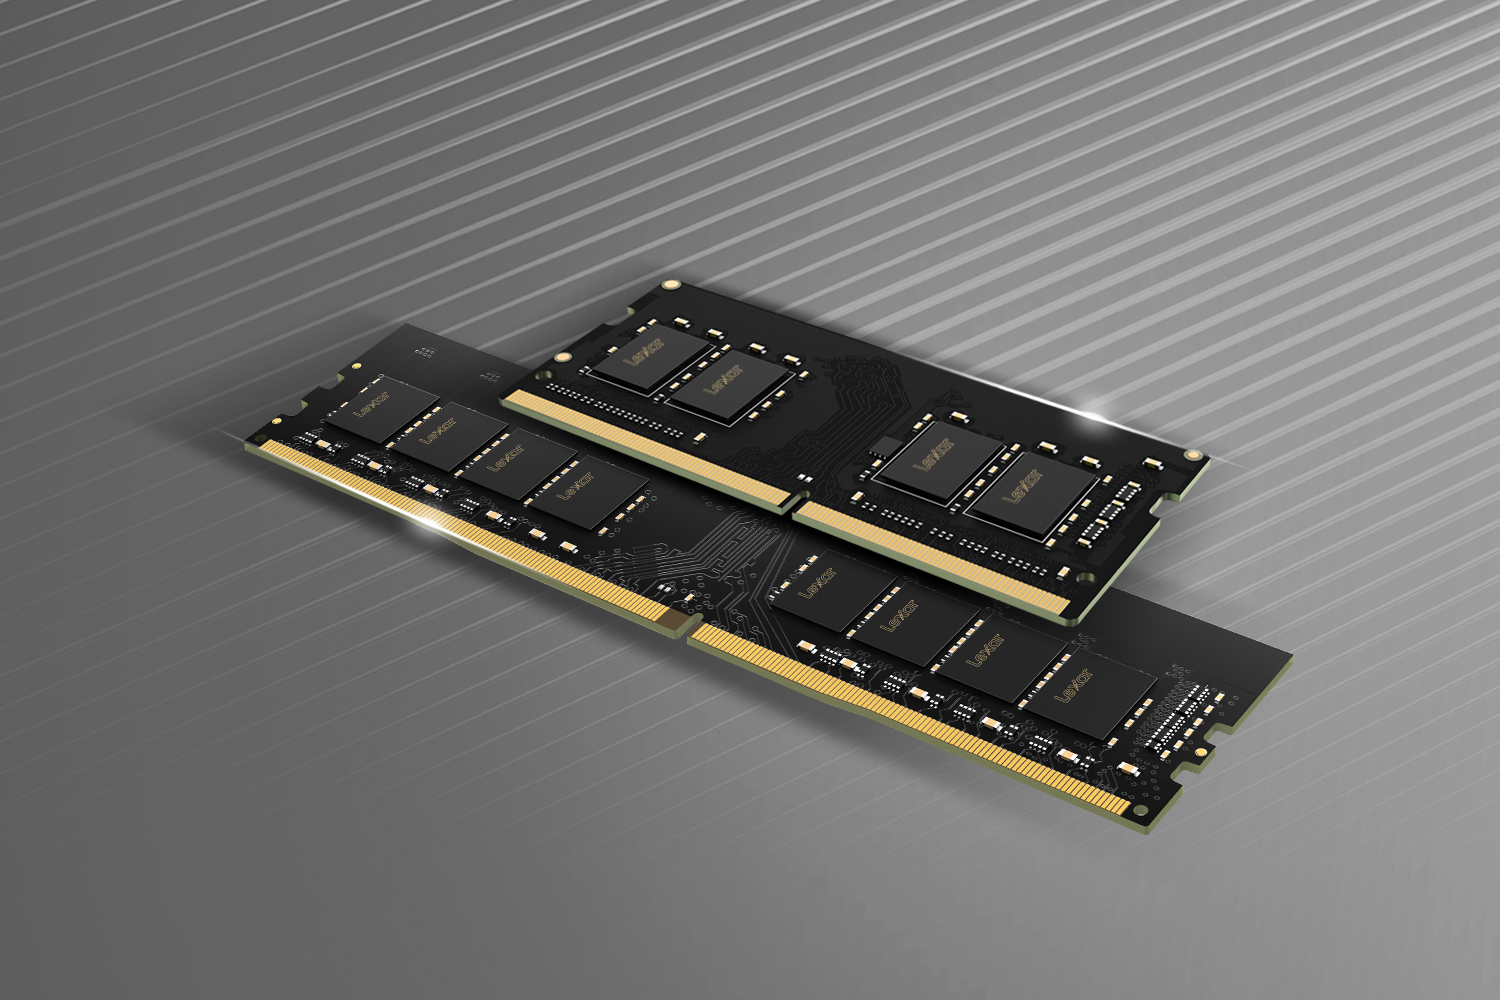 black and yellow Lexar DDR4 desktop memory product sitting on grey background